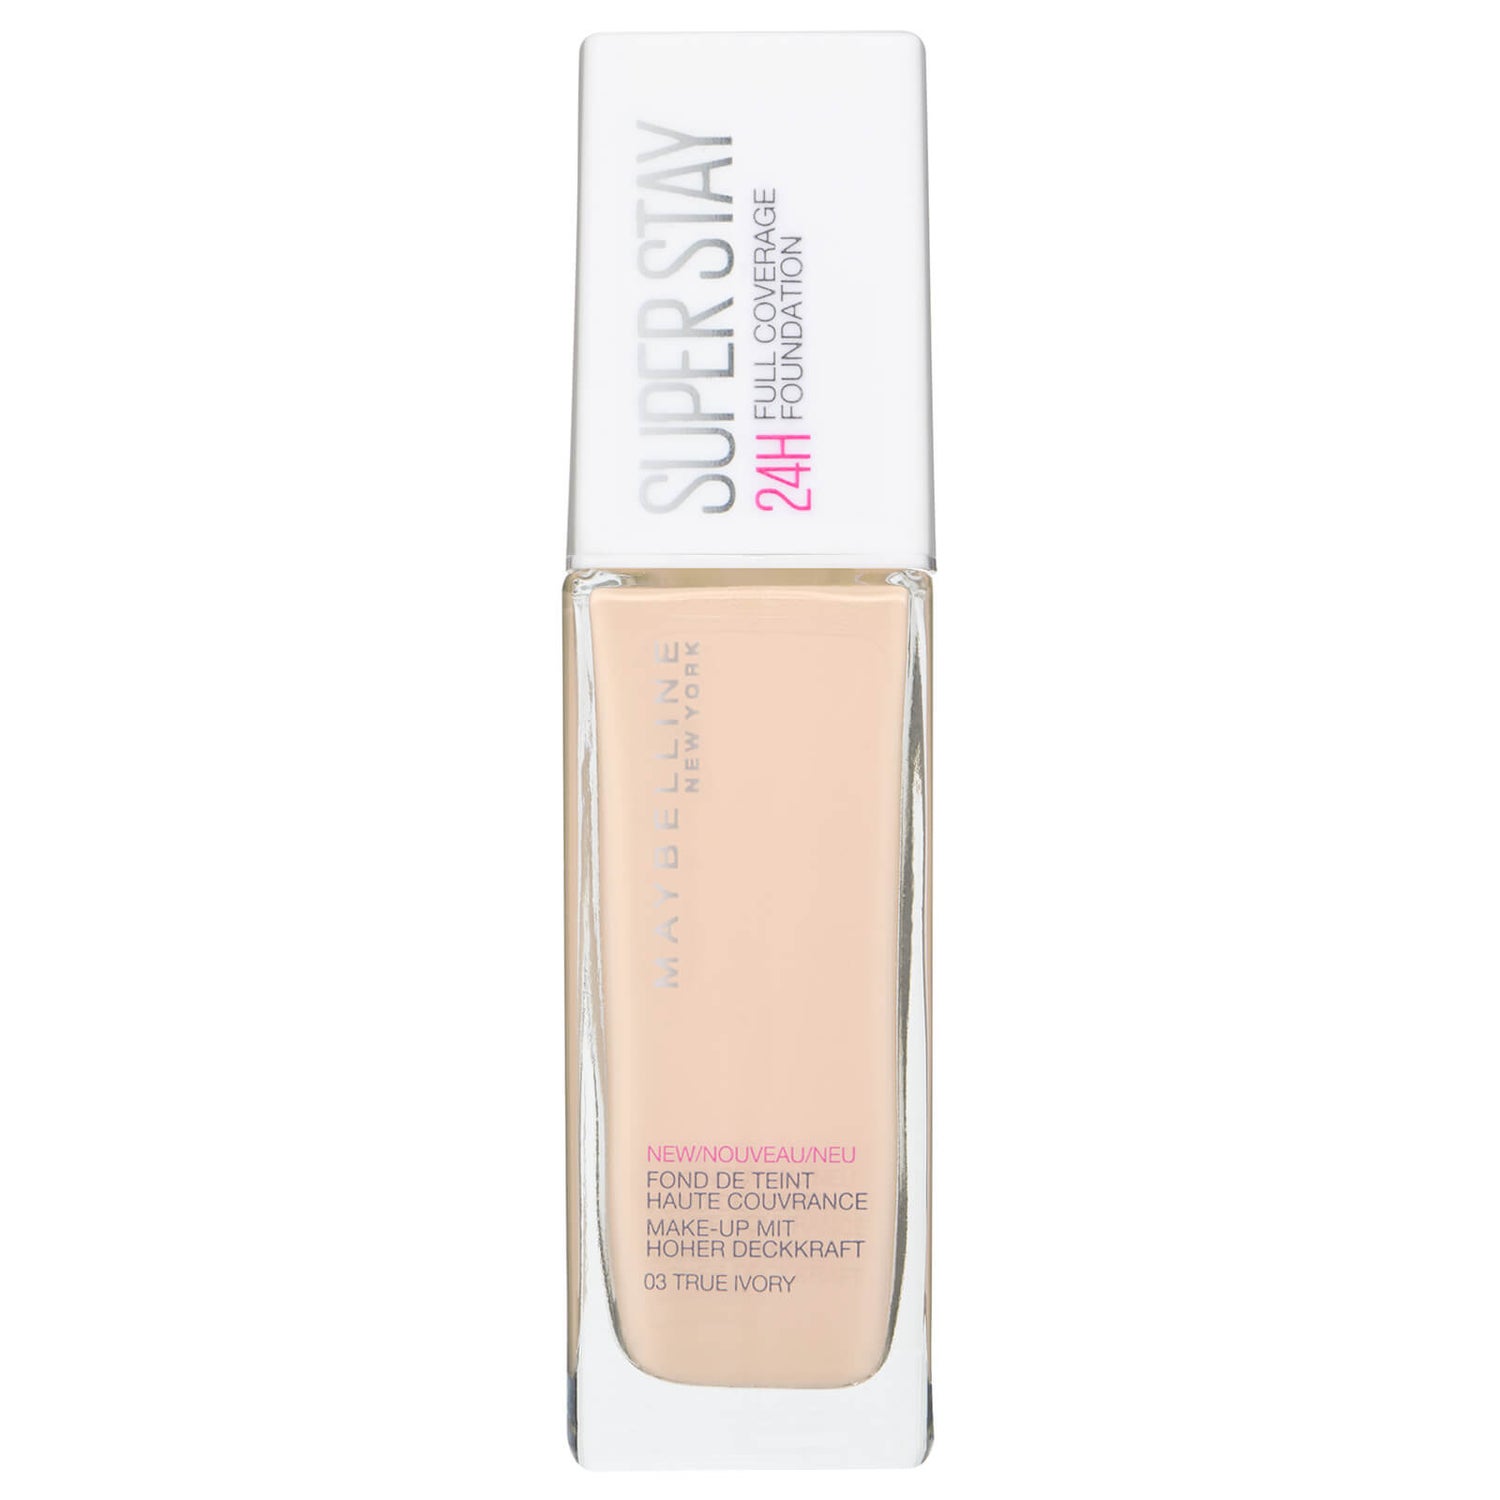 Maybelline Superstay 24H Liquid Foundation 30ml (Various Shades)